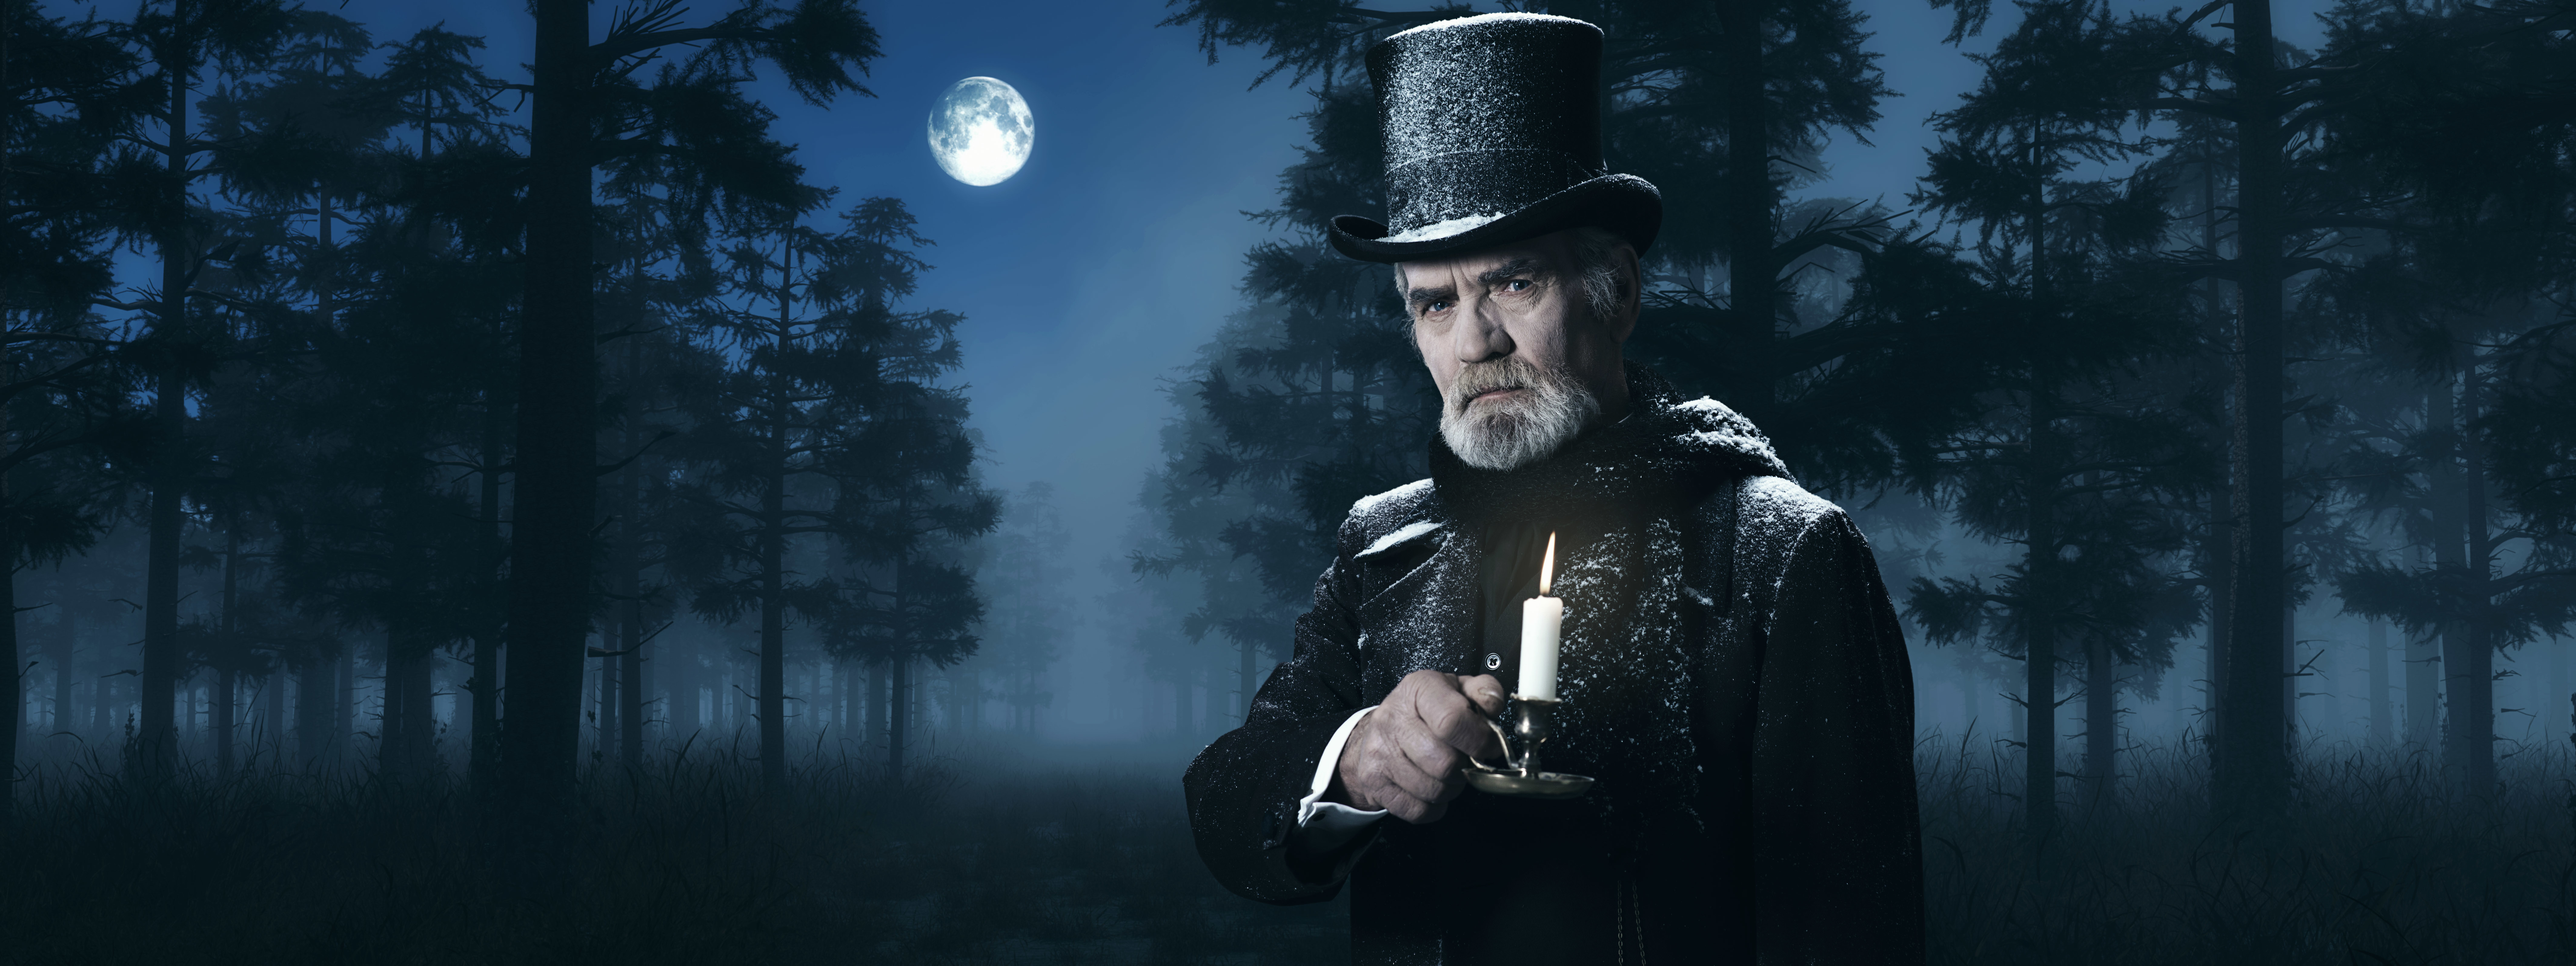 Dickens Scrooge Man with Candlestick in Foggy Winter Forest at Moonlight.